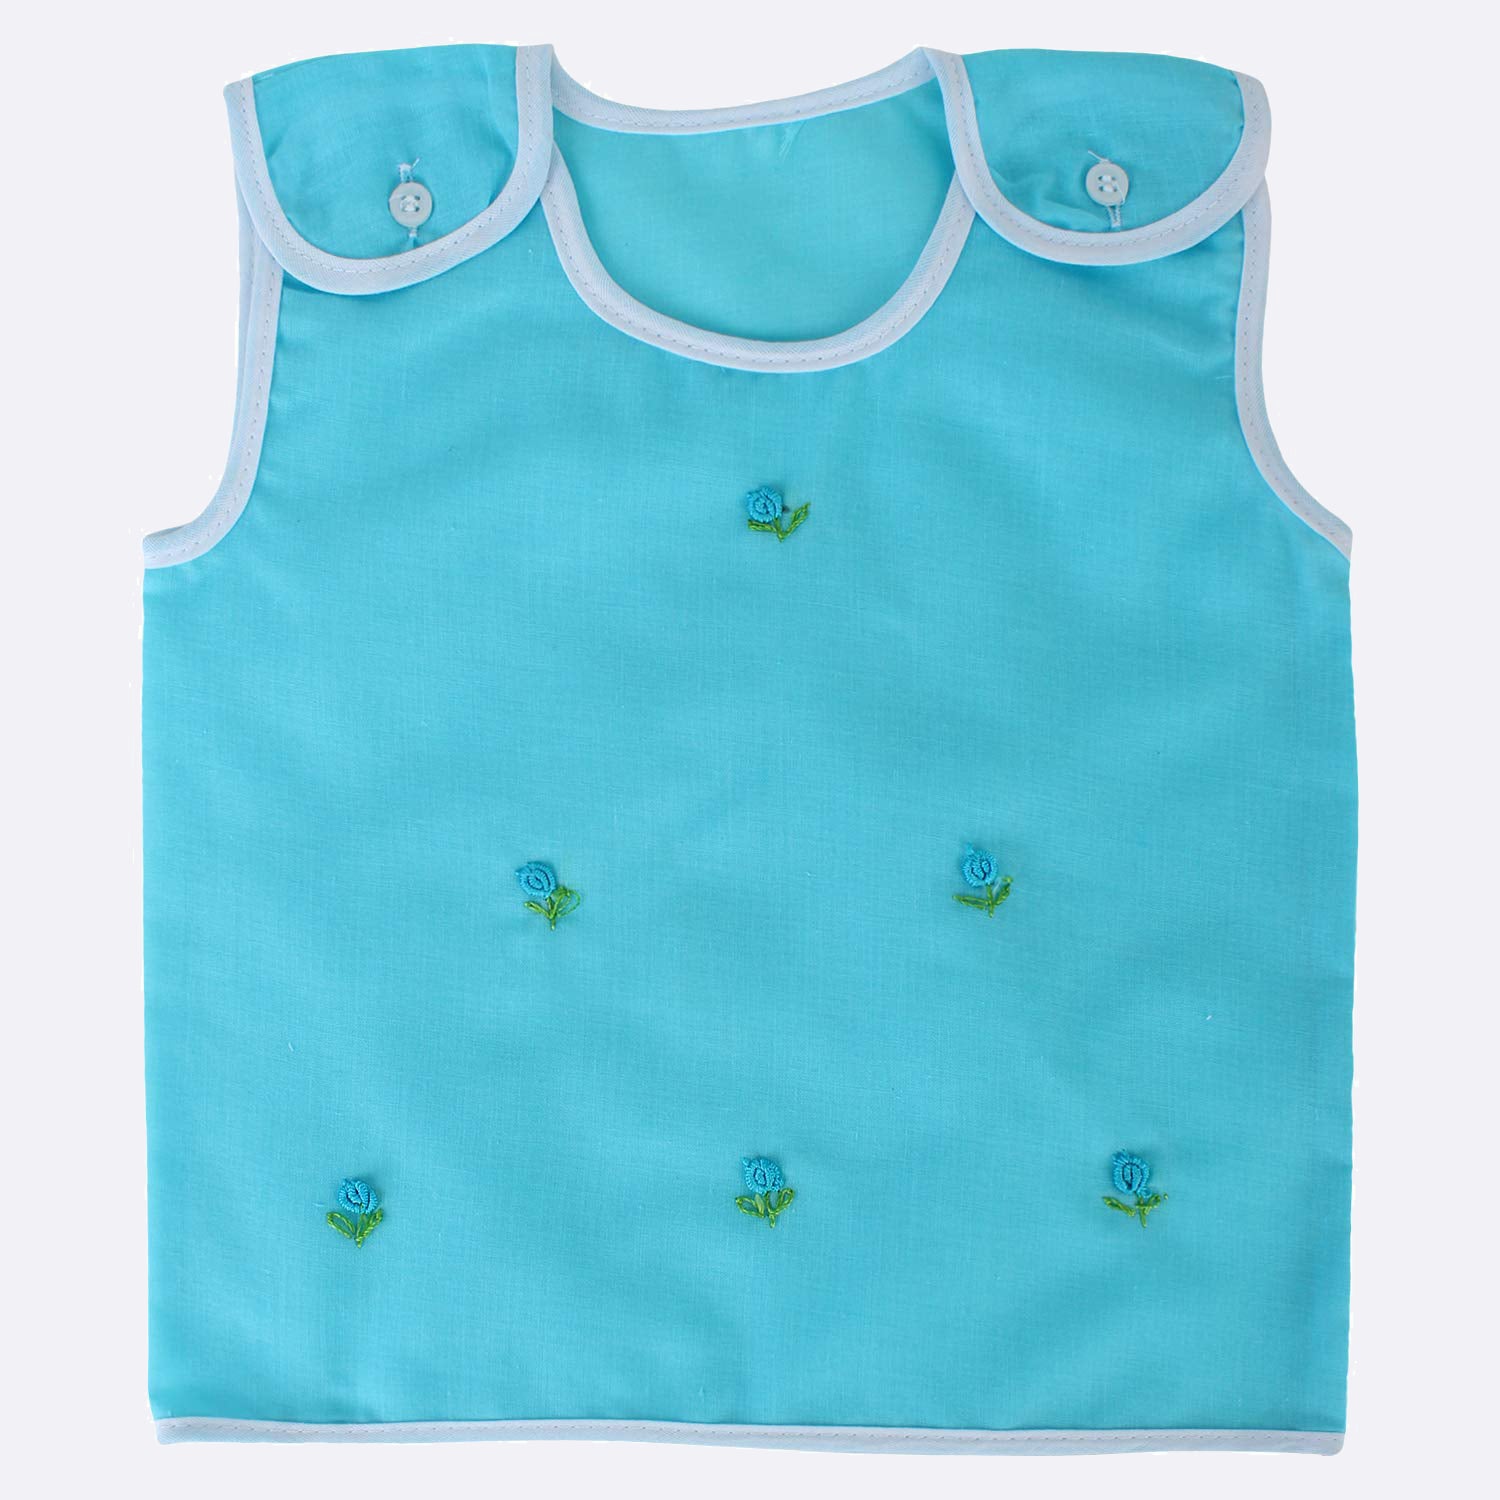 Soft and Cool Jhabla Vest for New Born (Blue, Pack of 1)